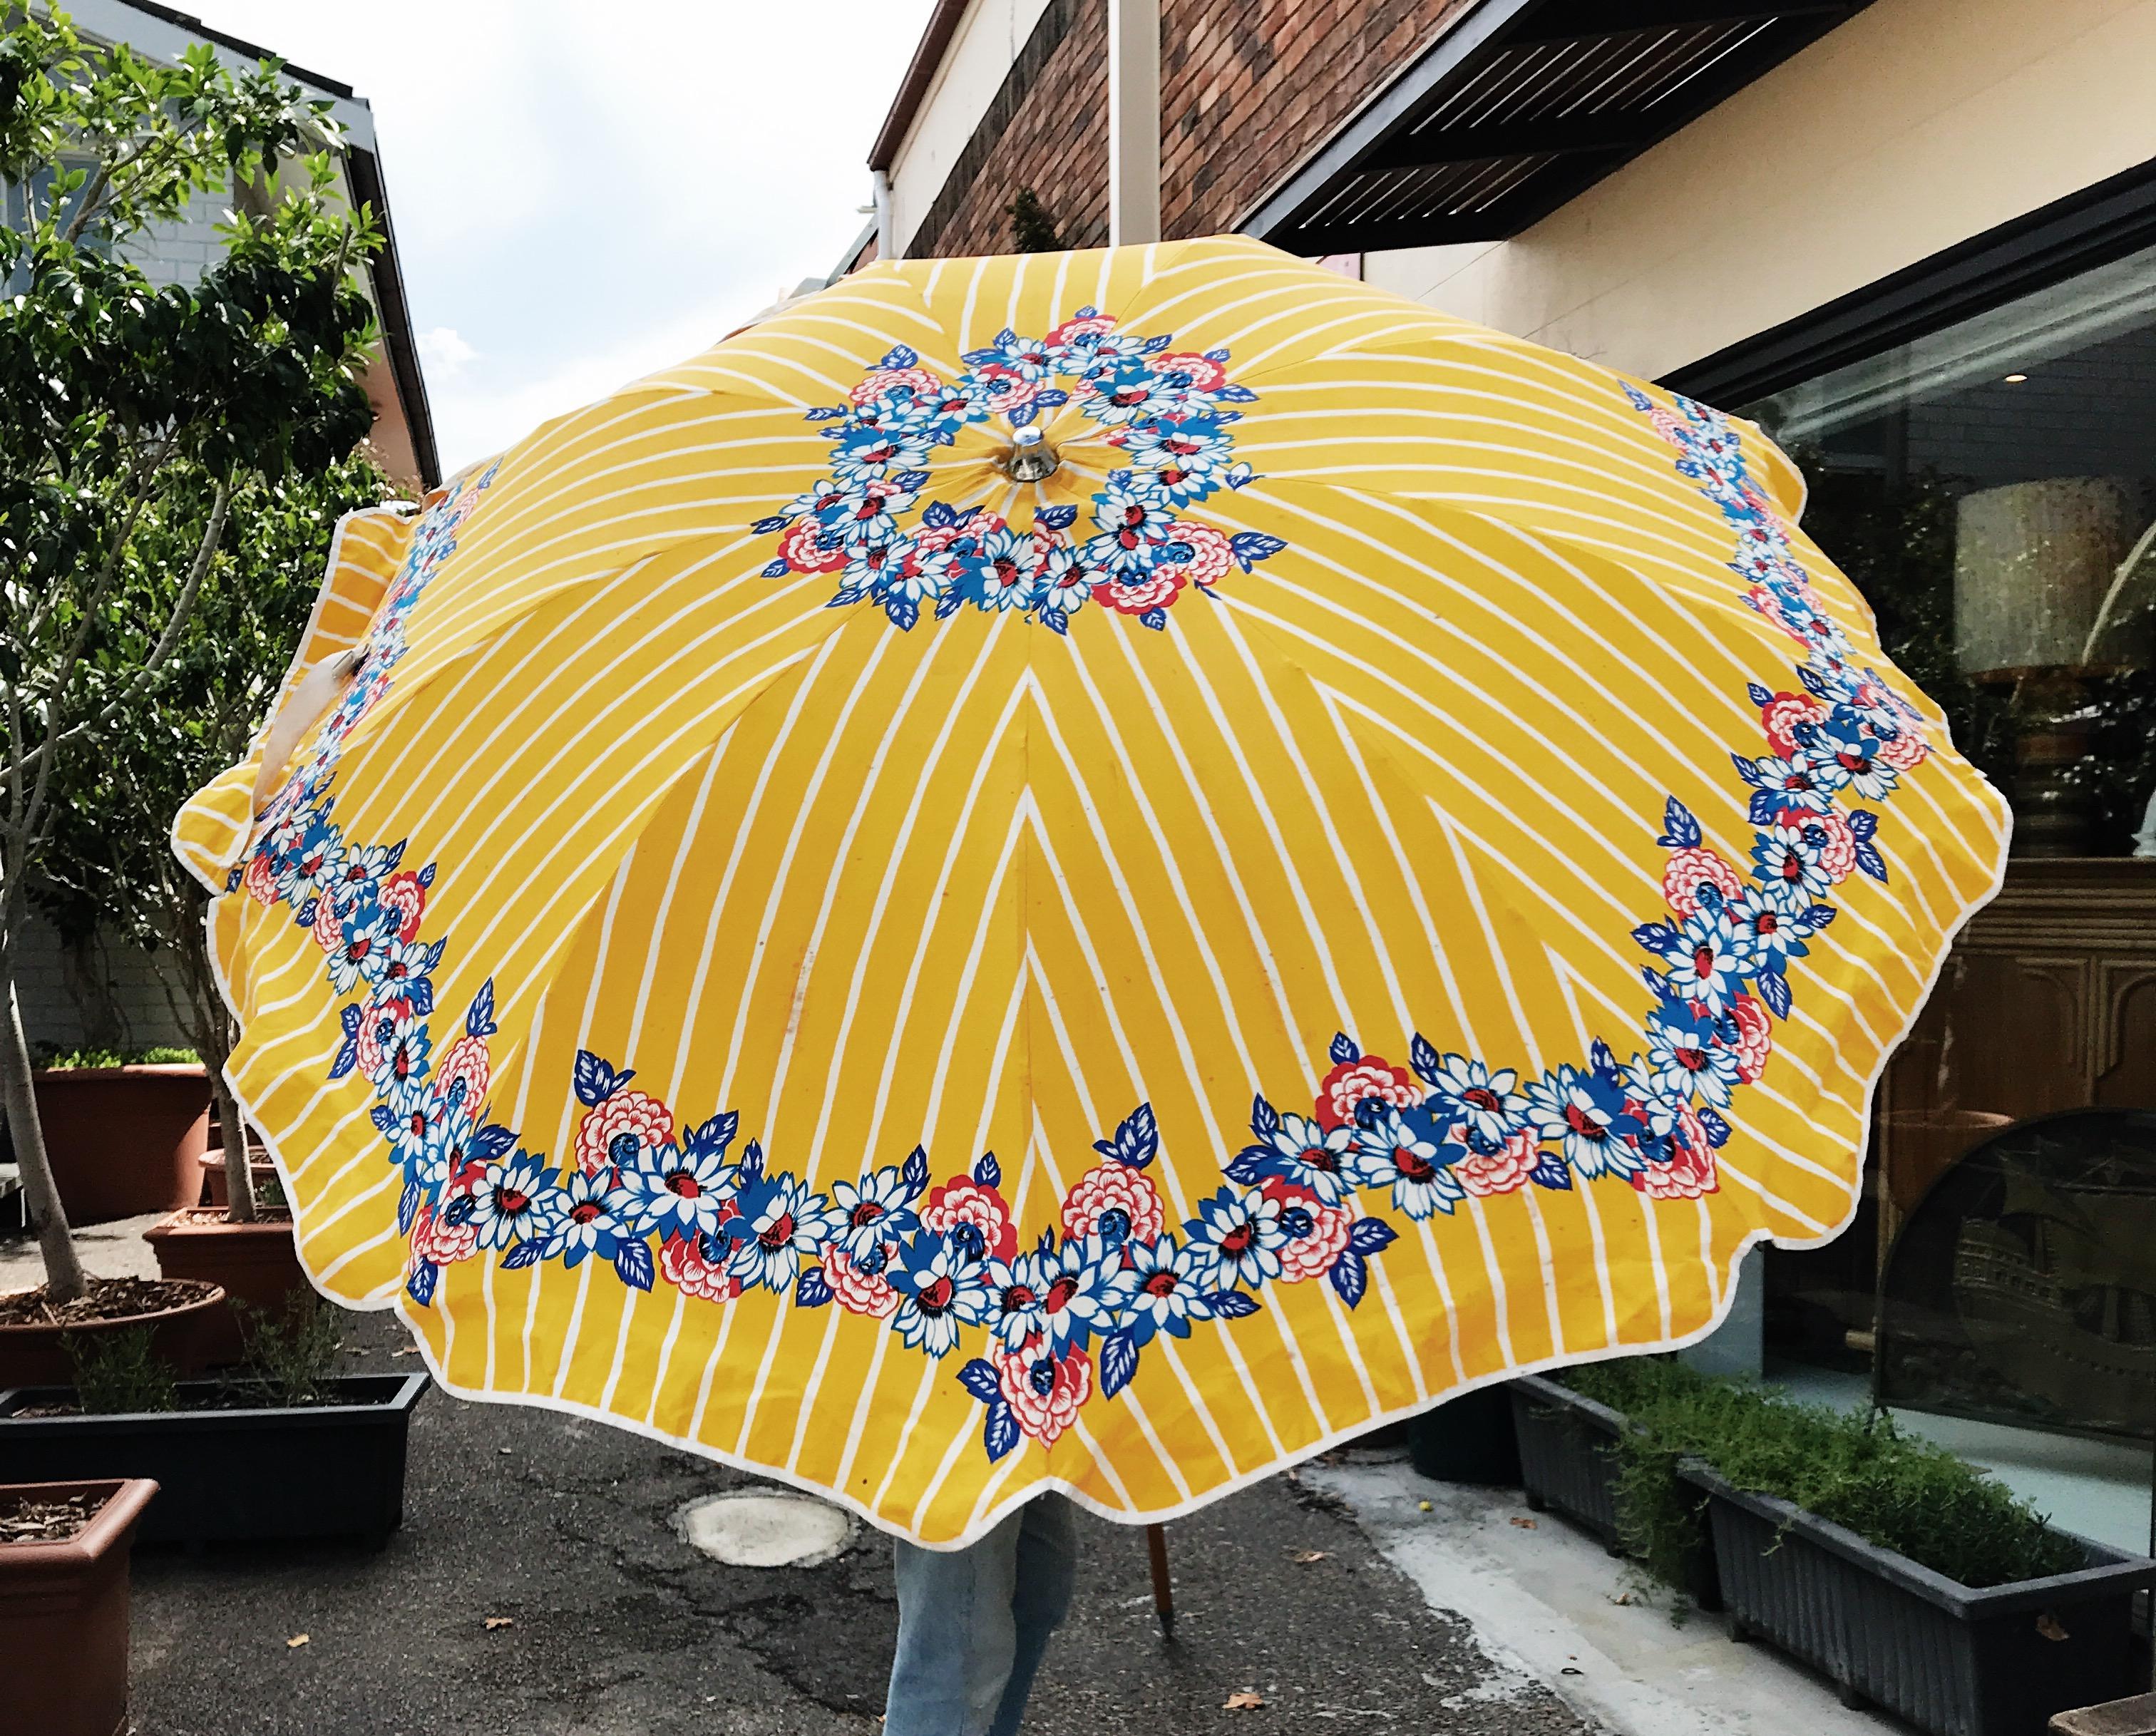 Marvellous 1960s vintage, floral and striped cotton beach umbrella, by renowned Australian outdoor umbrella company, Shelta.

This one has a built in bottle opener at the elbow of the wood and metal pole. A vital inclusion for any sunny afternoon